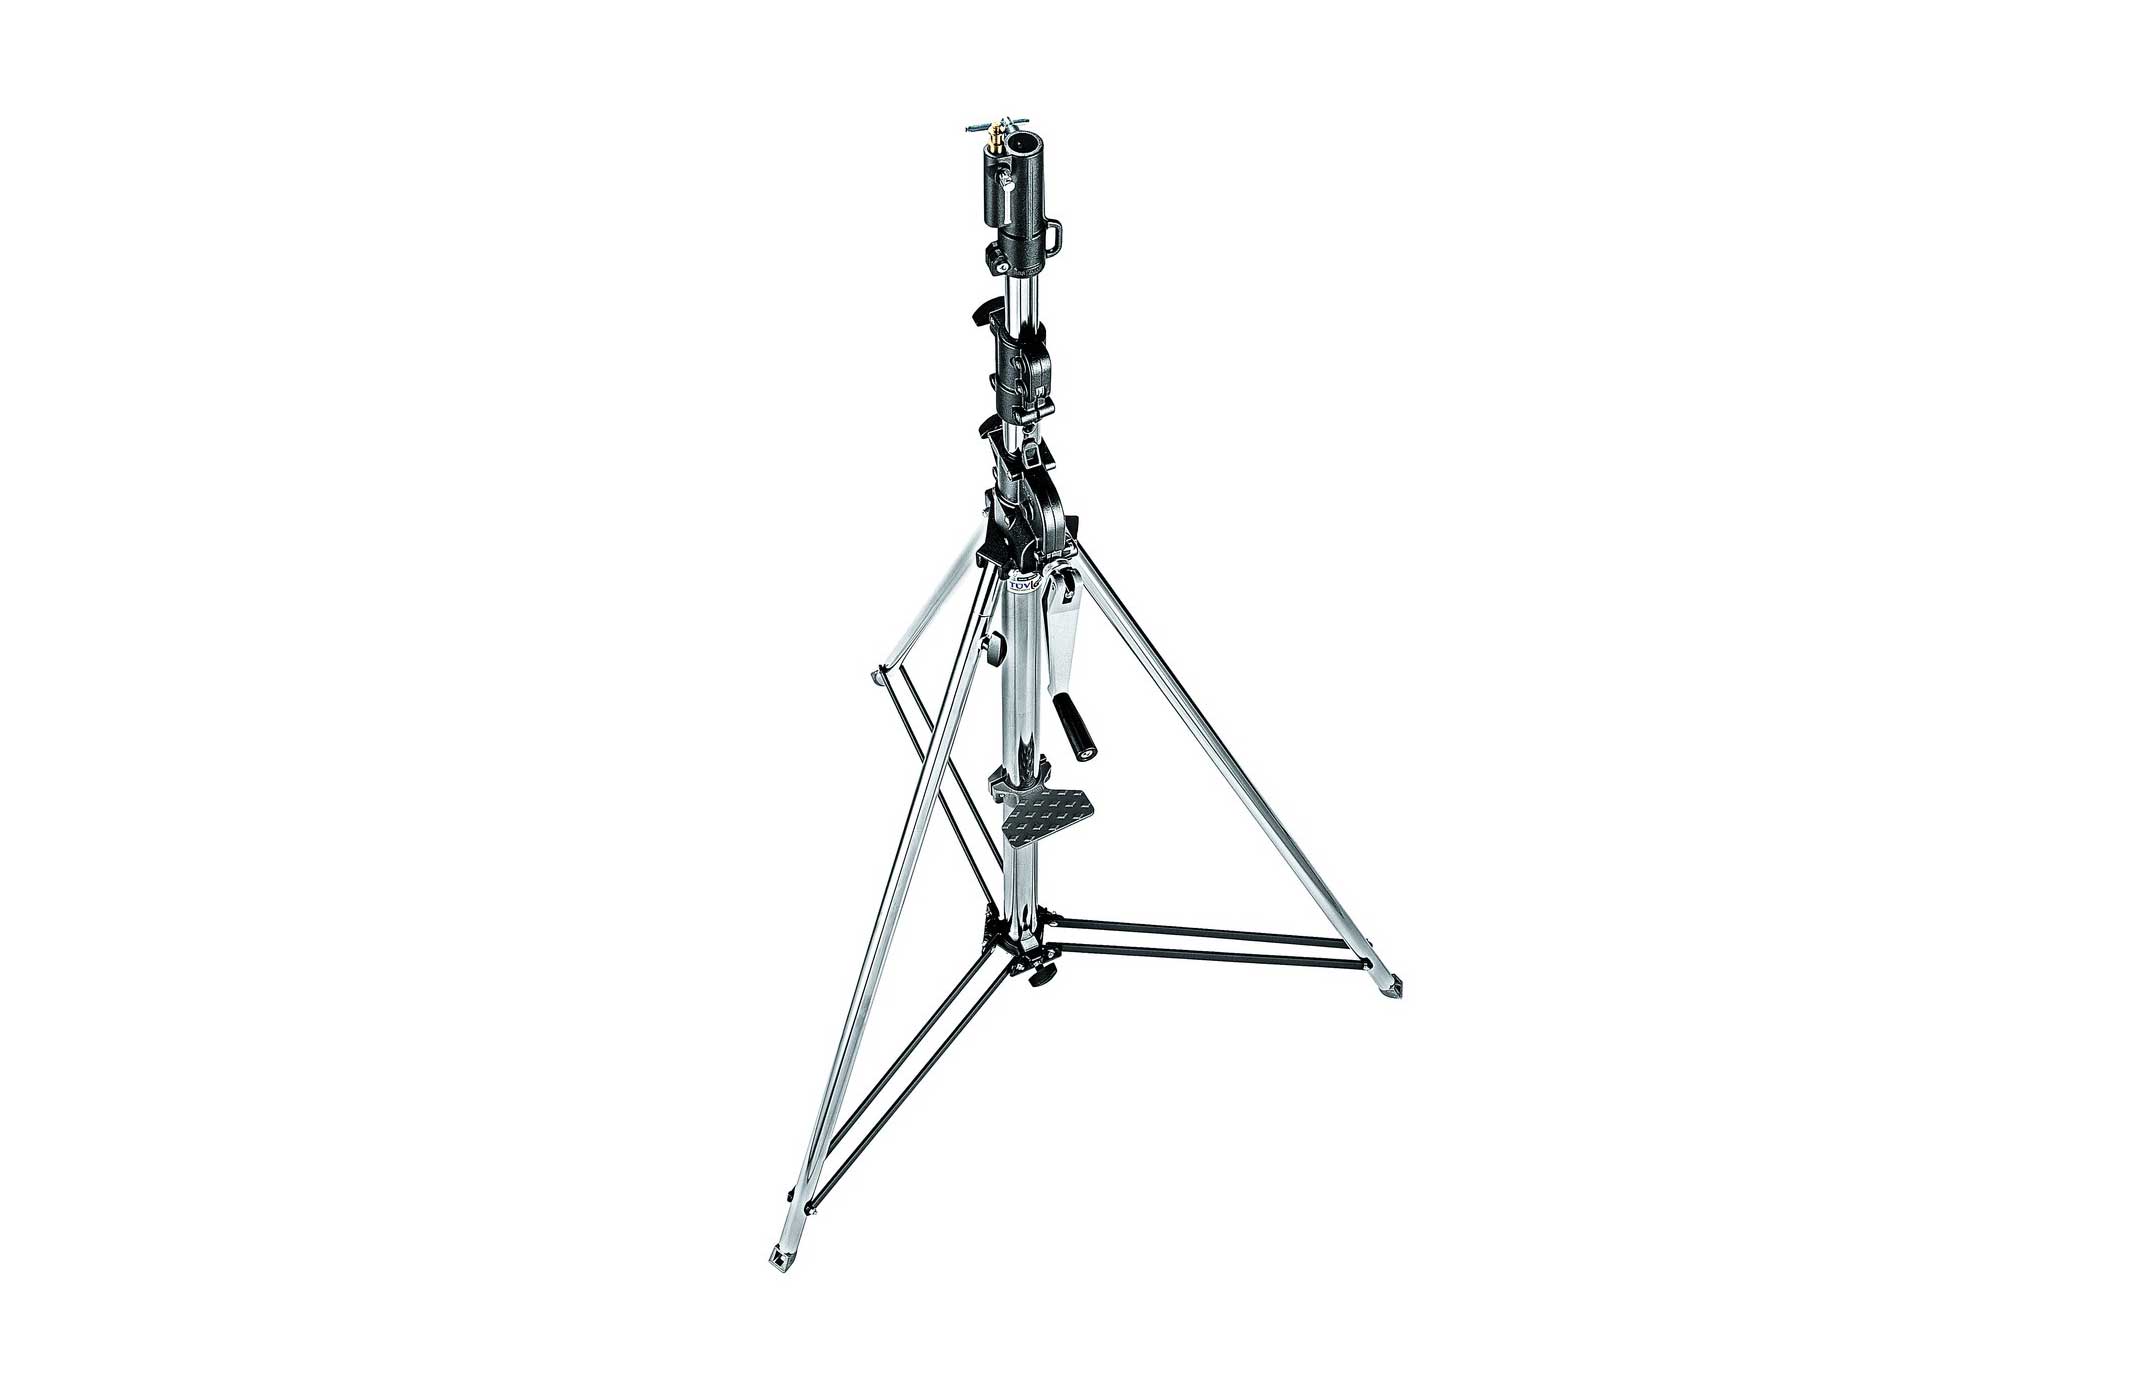 Stand 12. Си-стенд Manfrotto. Manfrotto Lighting Stand 087. Стойка для света Manfrotto. Штатив 40" c-Stand.